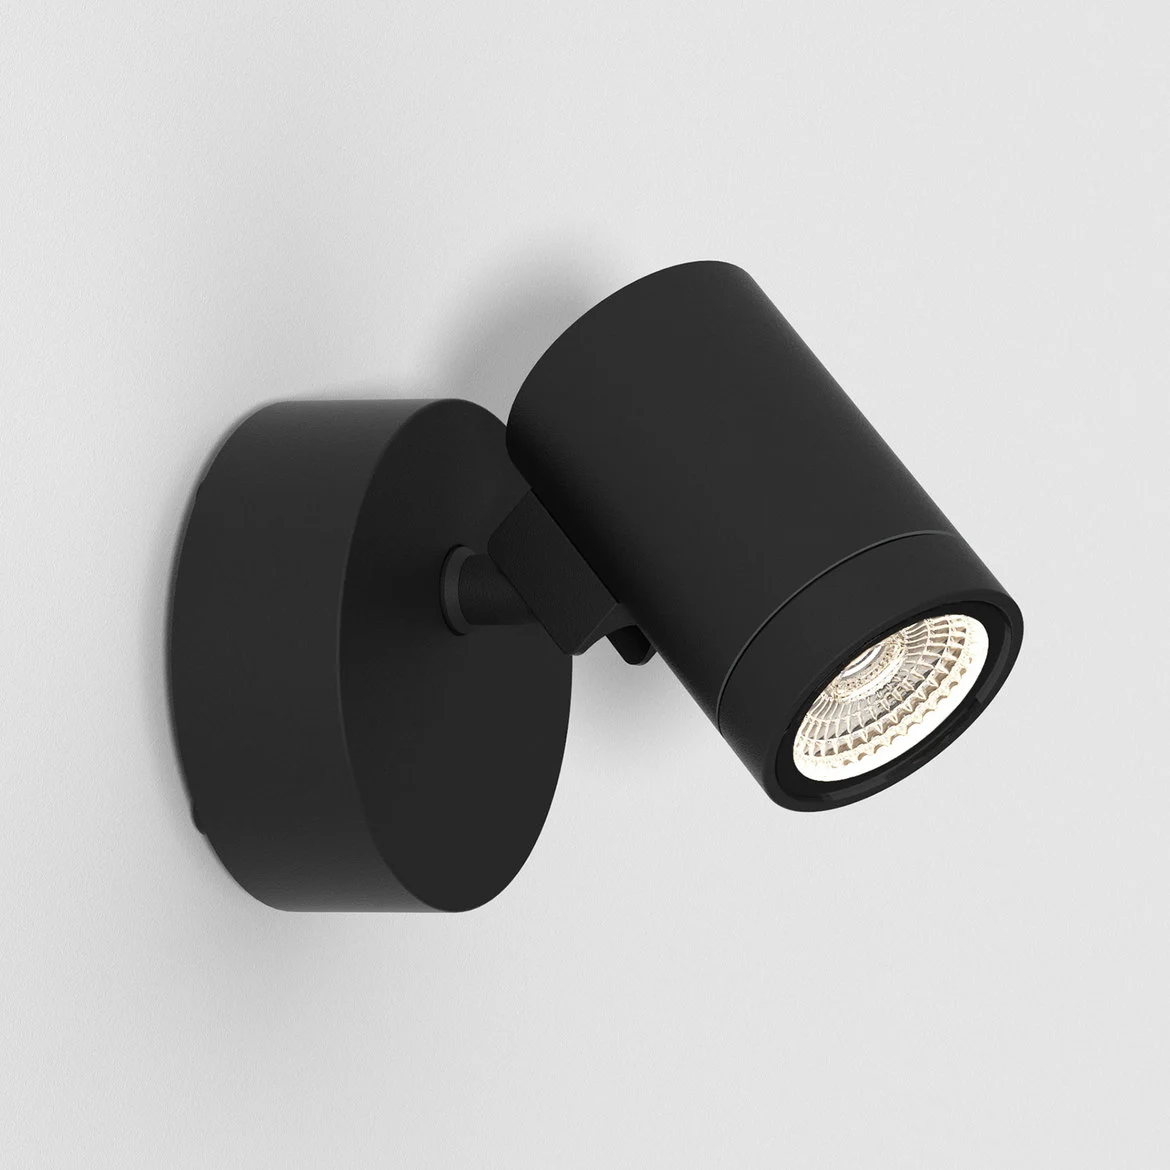 The Bayville spot light features a sleek, modern design with cylindrical body and round base for installation on a wall or surface. Made from steel in a textured black finish with a single spotlight. IP65 rated and suitable for outdoor use. Complete with an integrated 8.1W LED in 3000K.